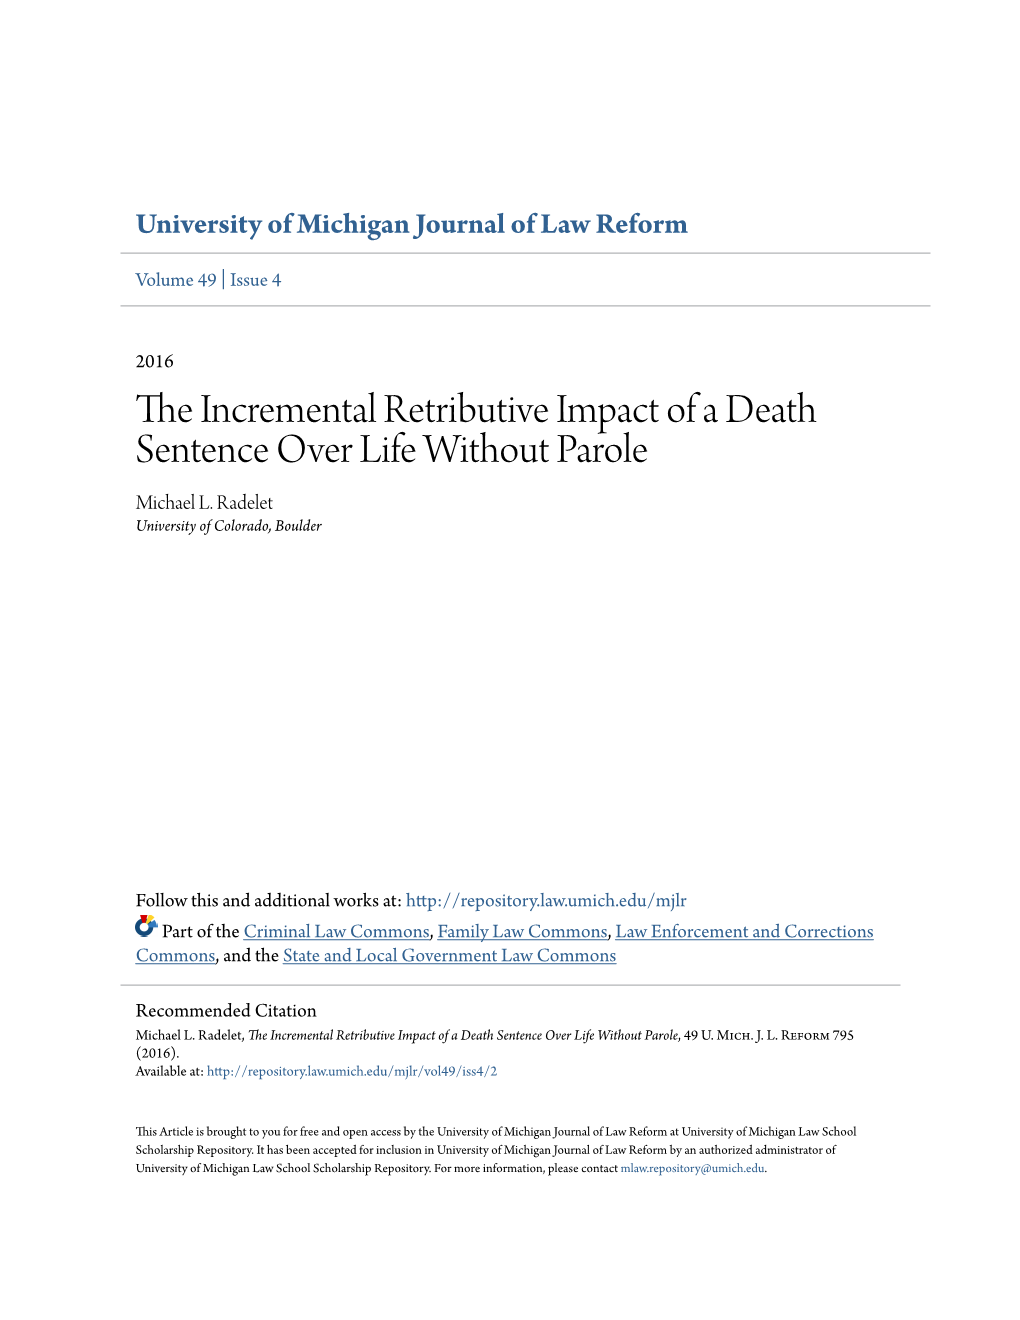 The Incremental Retributive Impact of a Death Sentence Over Life Without Parole, 49 U